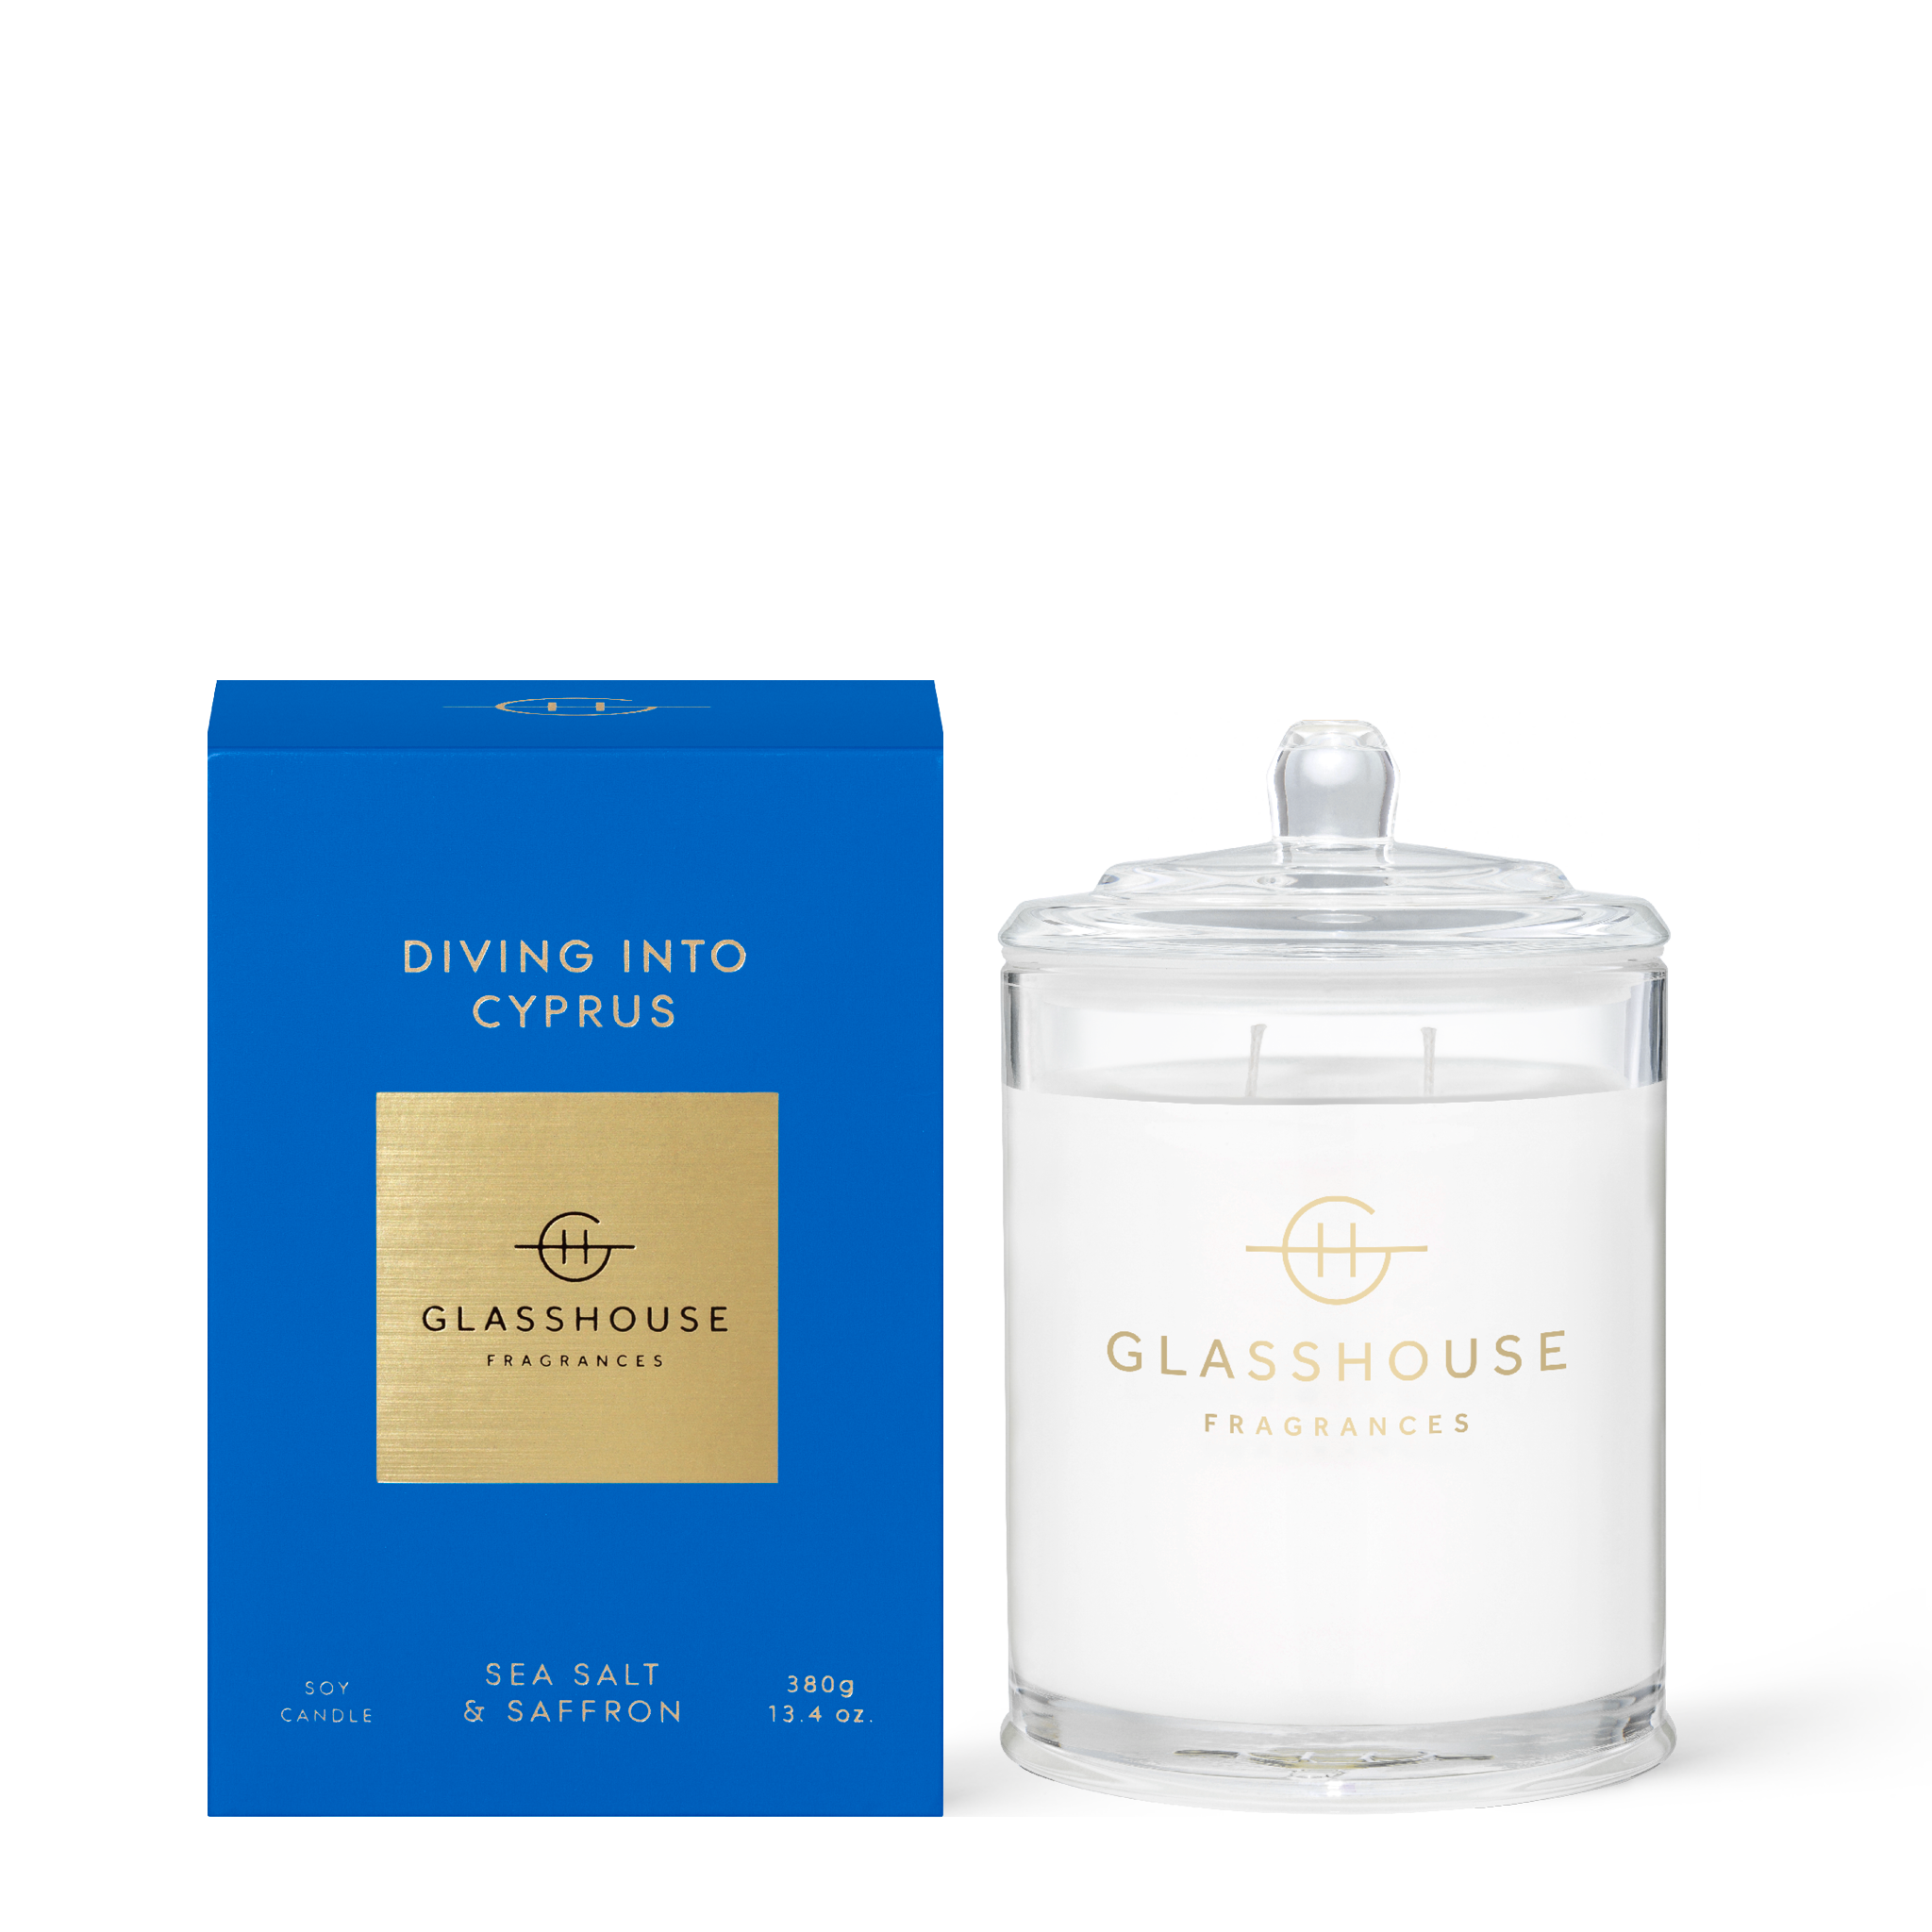 Glasshouse Fragrances Diving into Cyprus Sea Salt and Saffron 380g Soy Candle with box 